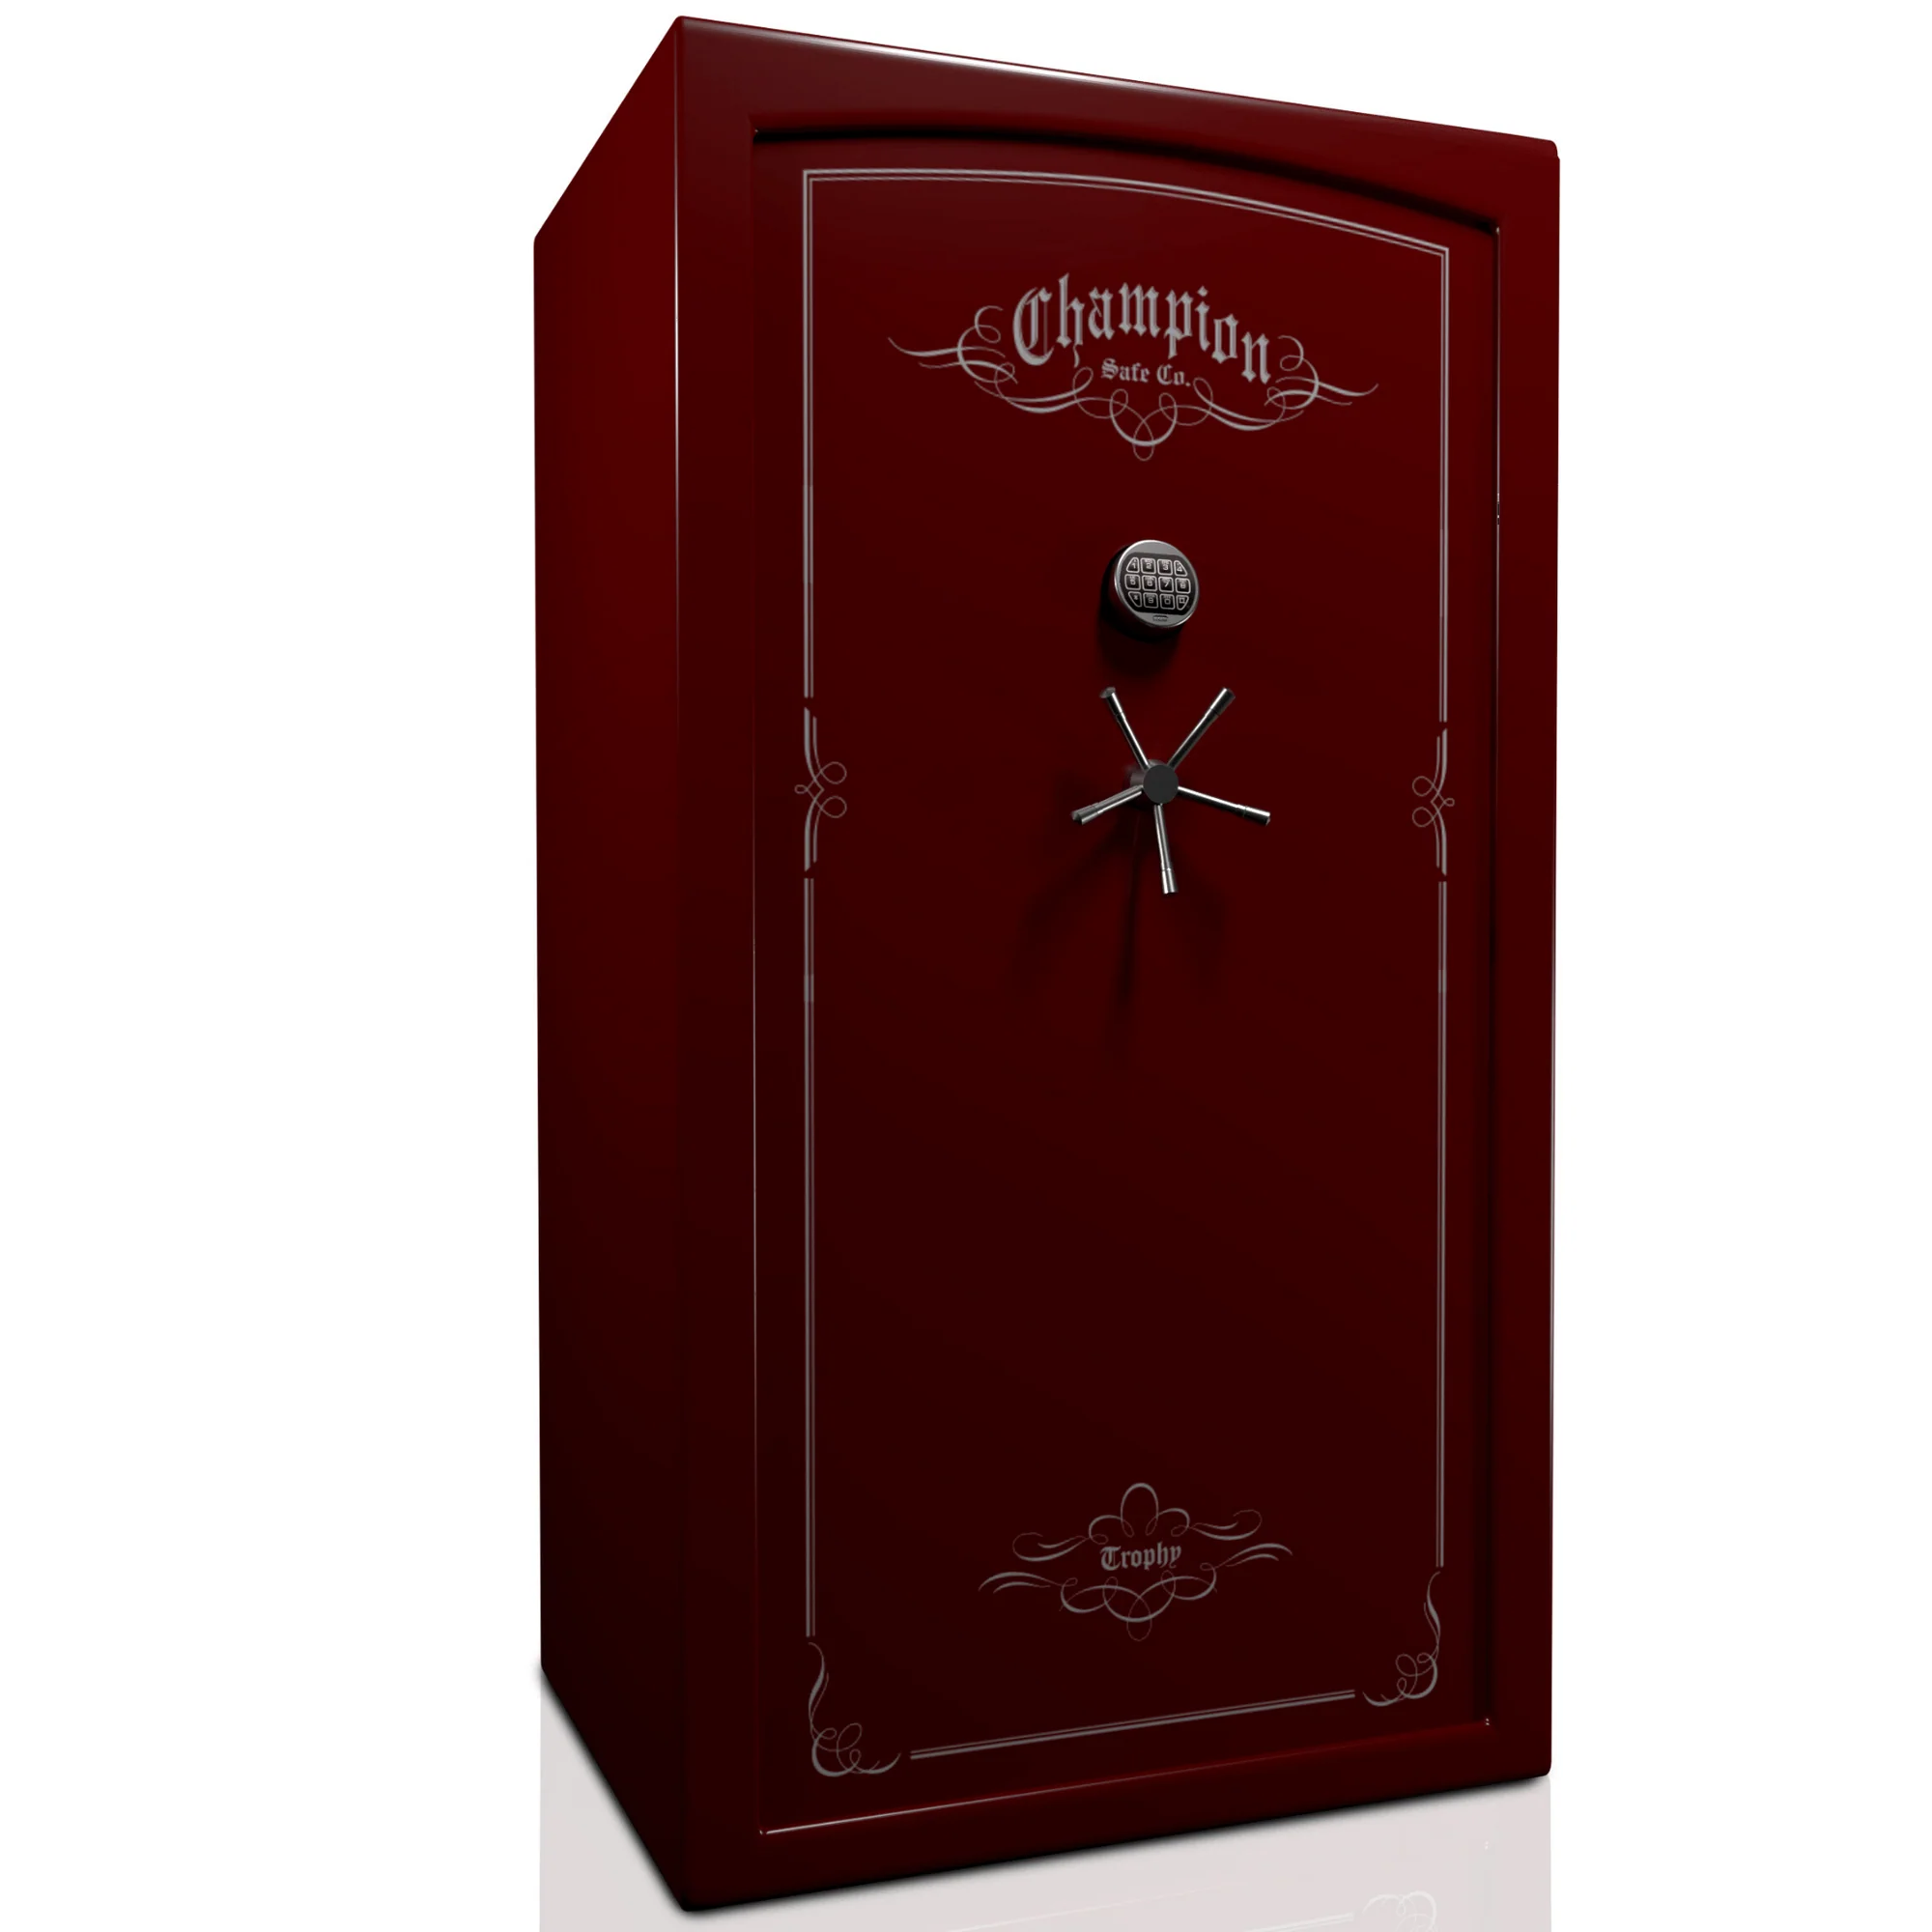 Champion Trophy Series | Steel Thickness | Electronic Lock | Gun Safes | Vaults | Heavy Duty